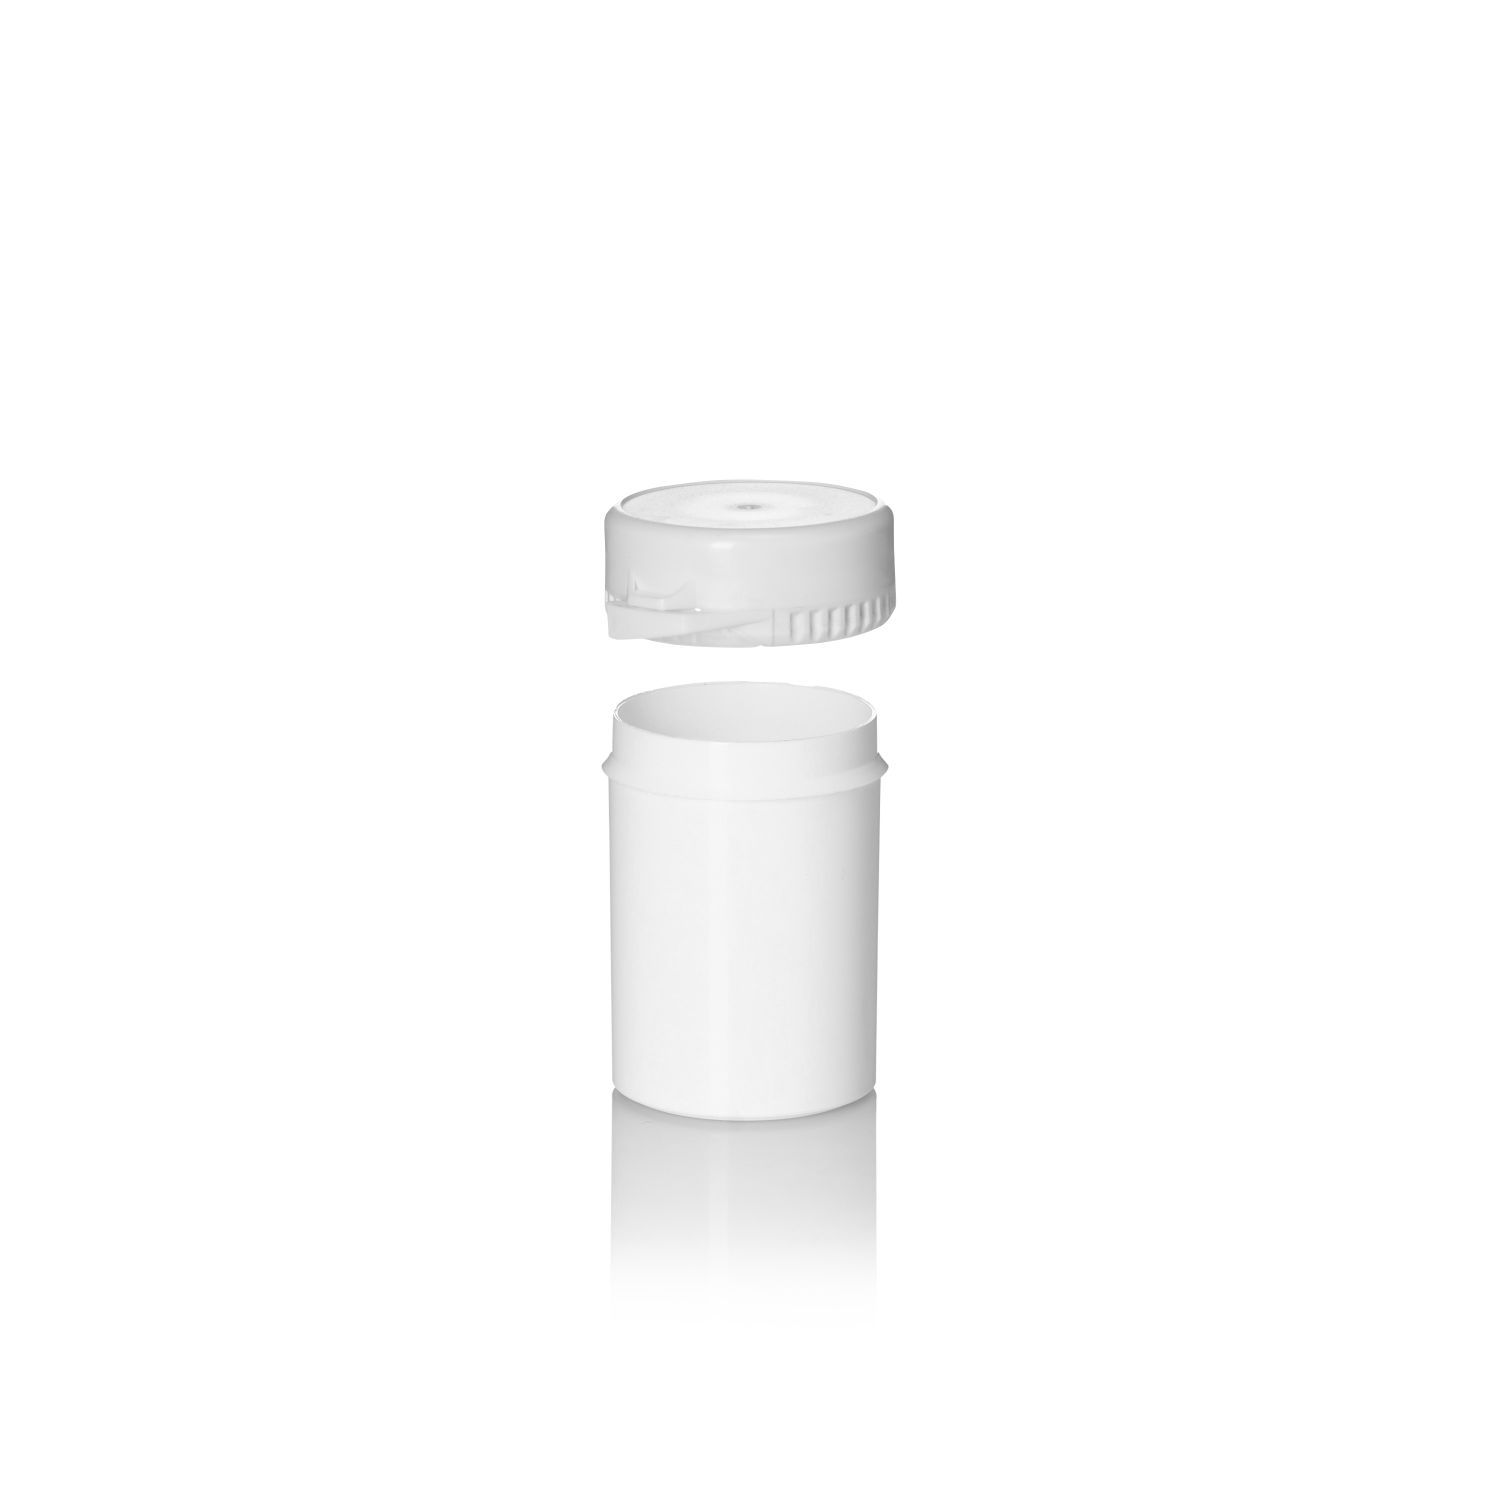 White PP Tamper Evident Lid to suit RSS100, RSS130 and RSS160